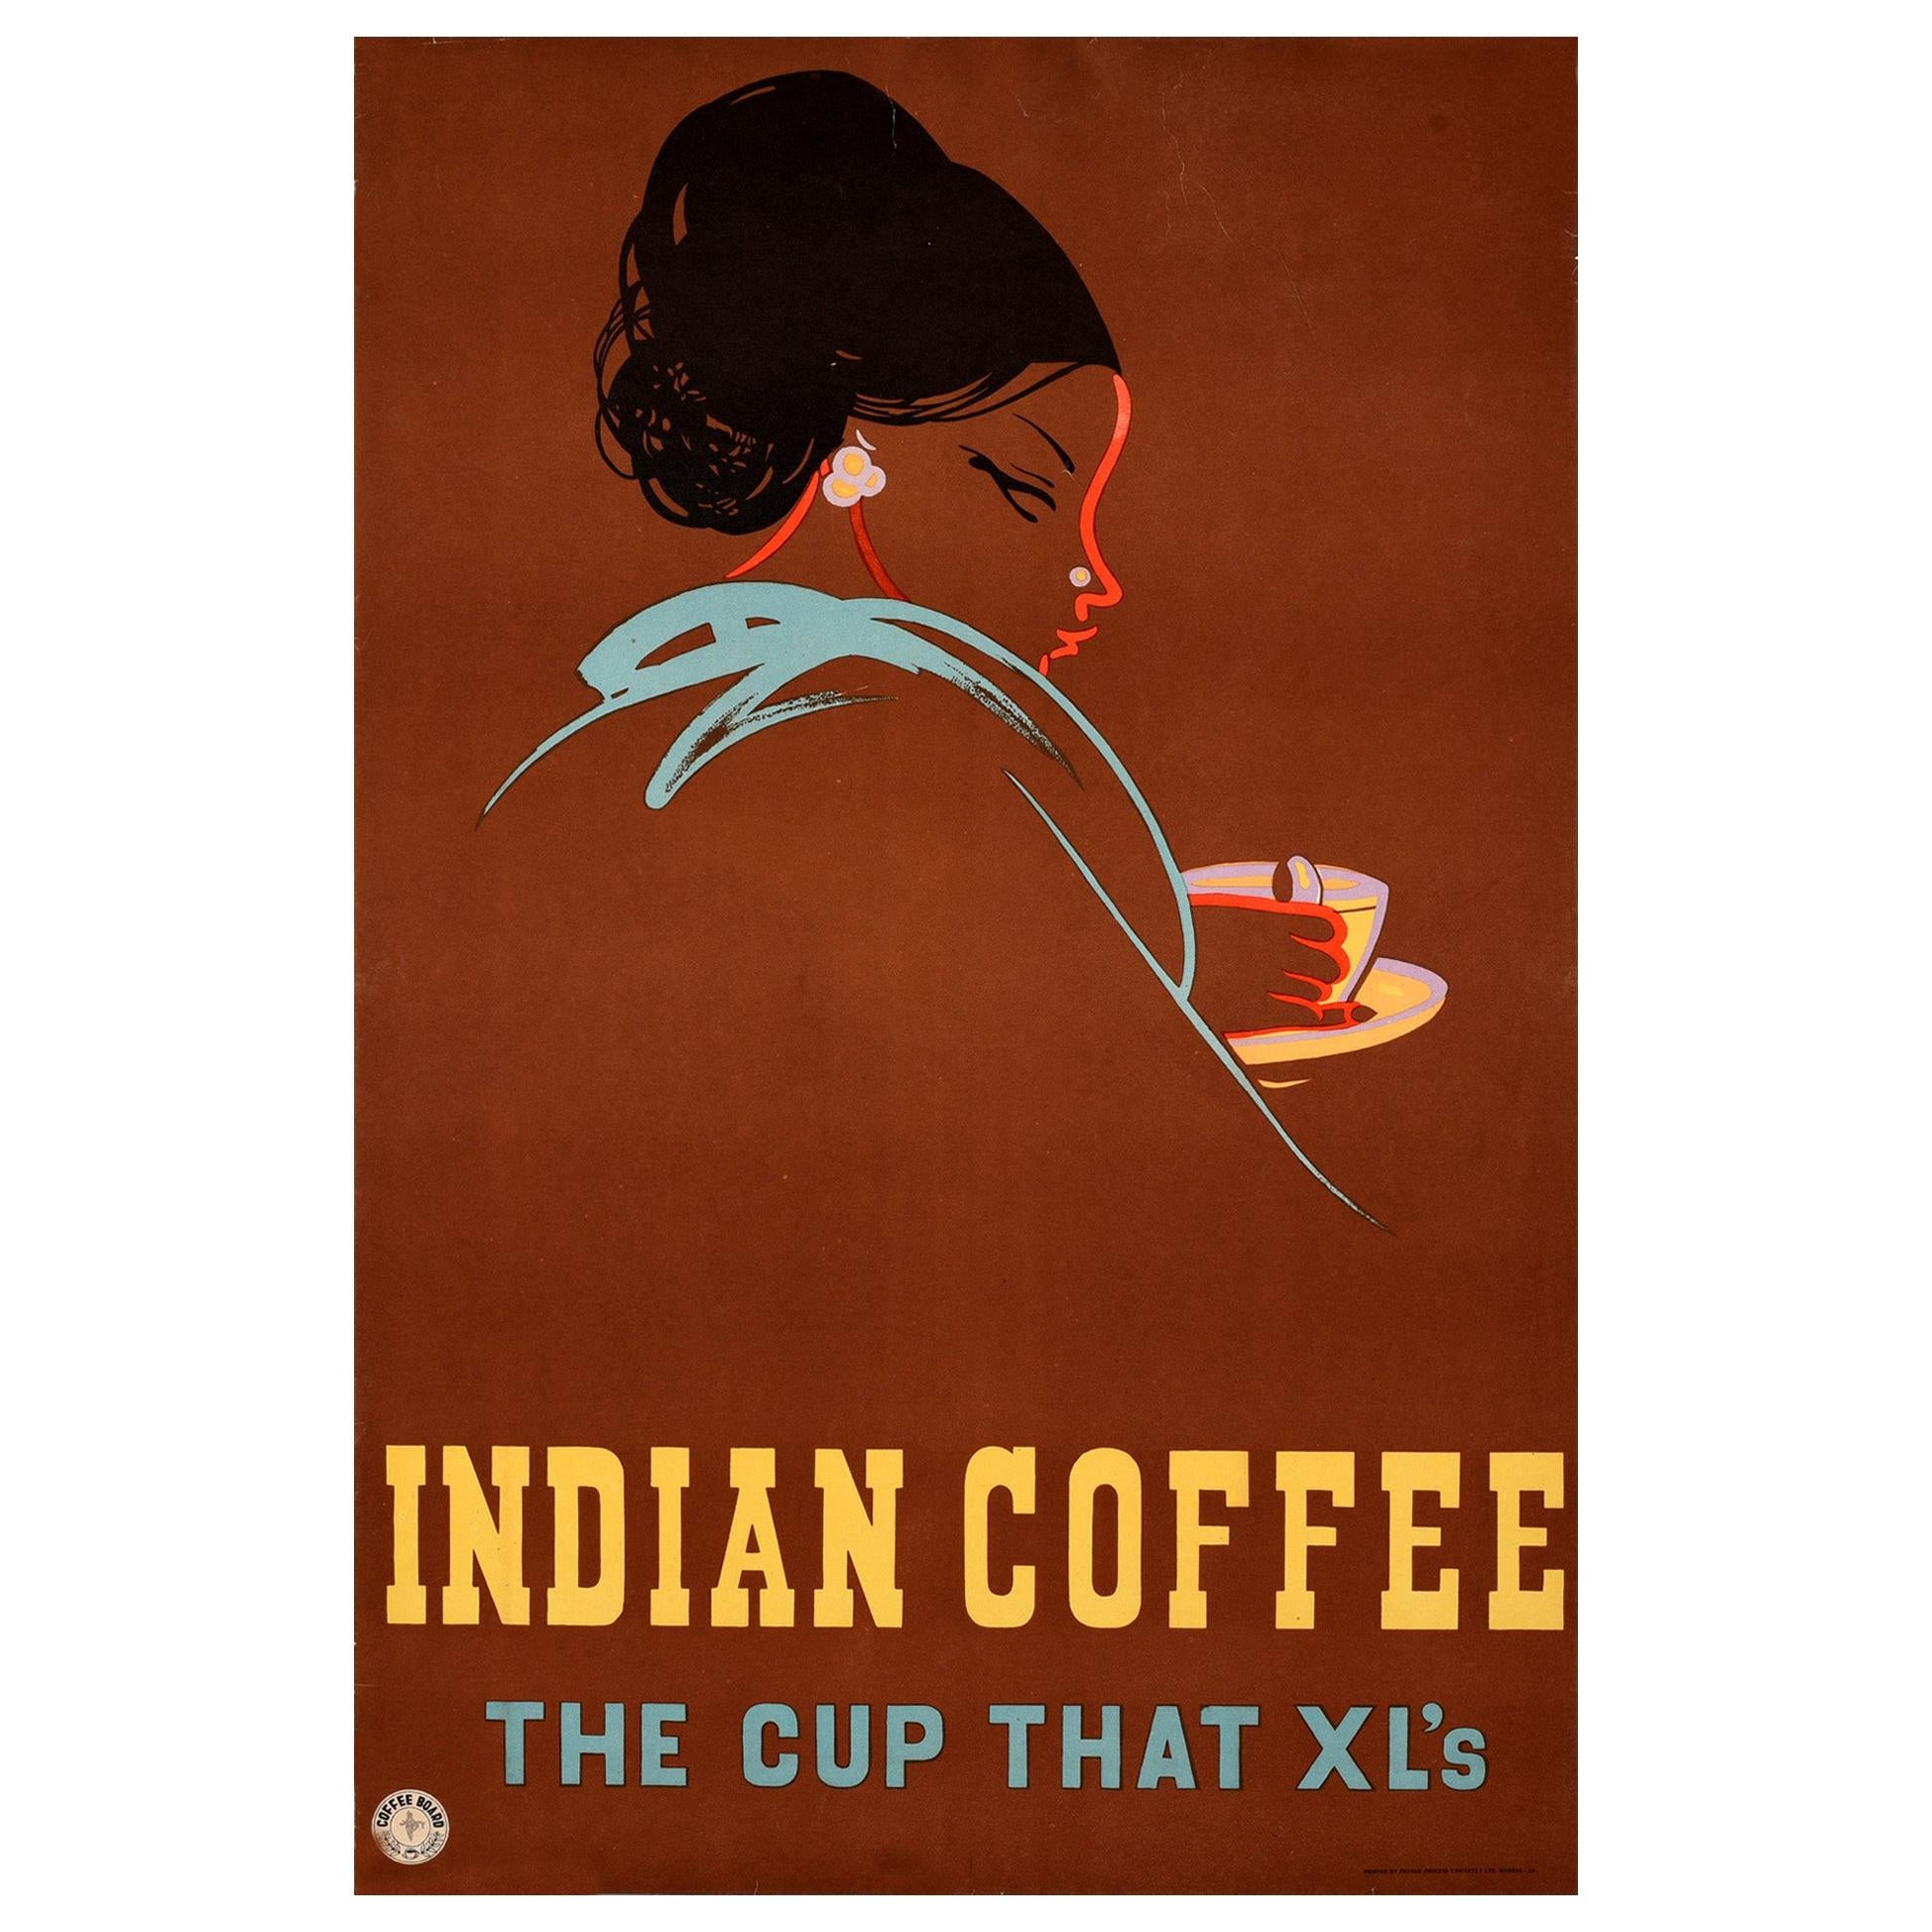 Original Vintage Poster Indian Coffee The Cup That XL's India Drink Coffee Board For Sale